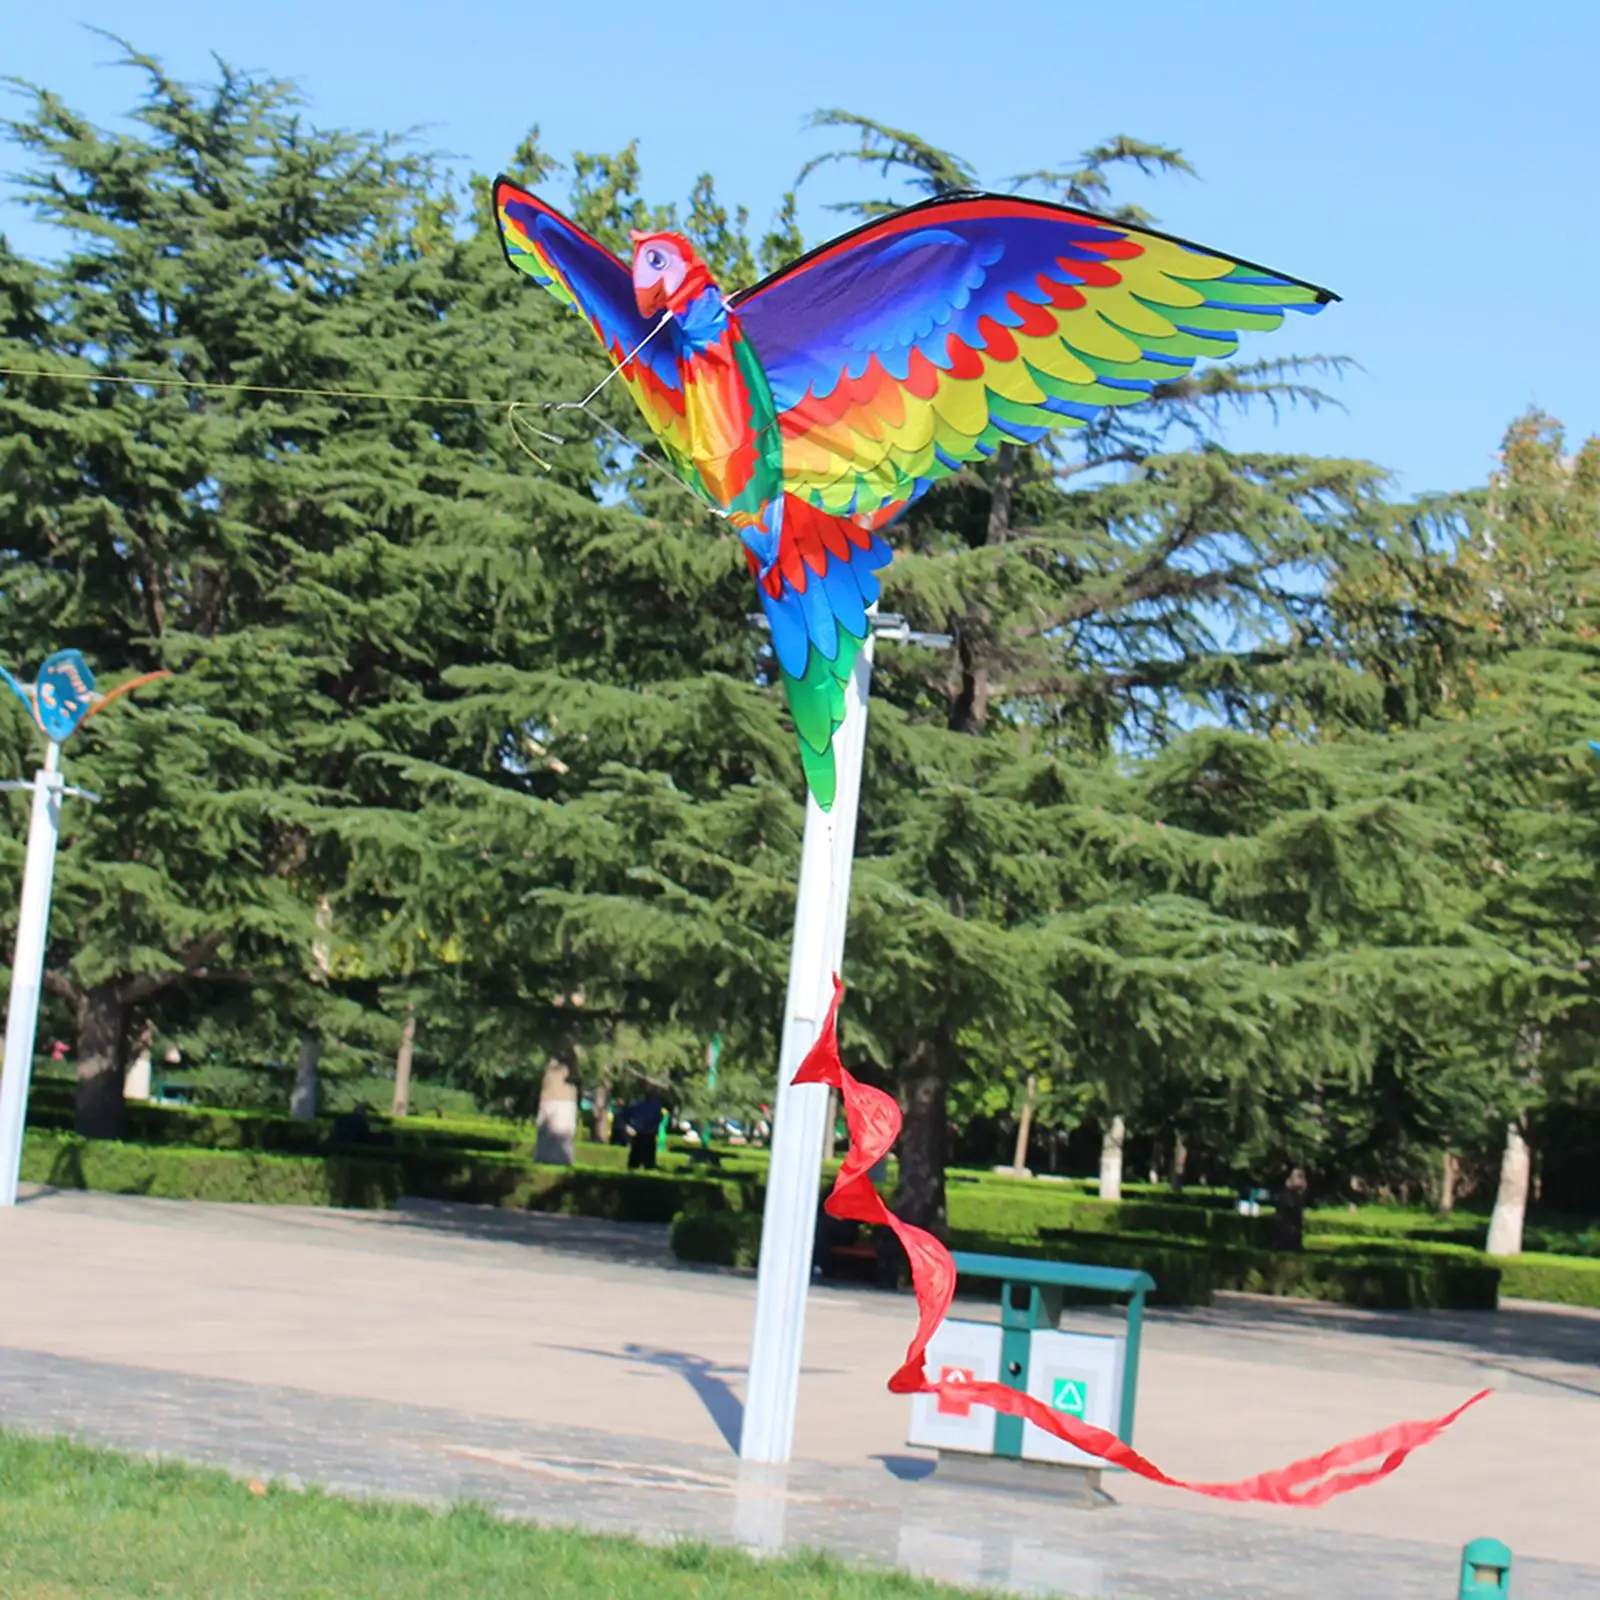 1.4M Parrot Kite Handle with 100M String Kids Toys Beach Game Children Flying Game Family Outdoor Games, for Garden Park Beach